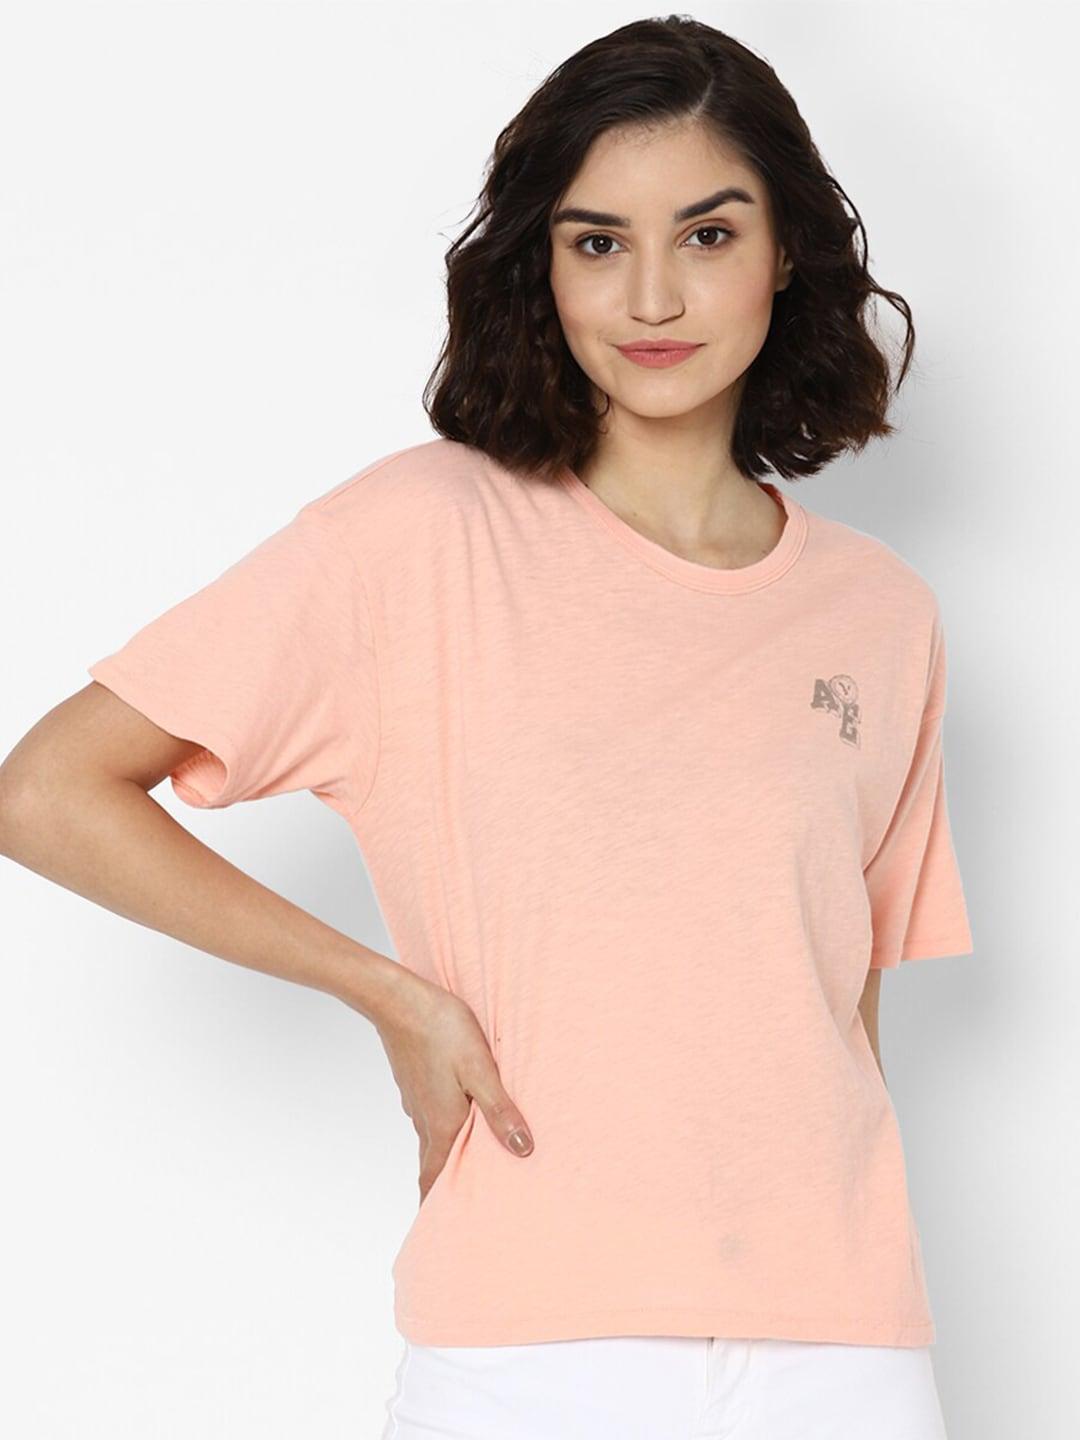 american-eagle-outfitters-women-peach-solid-t-shirt